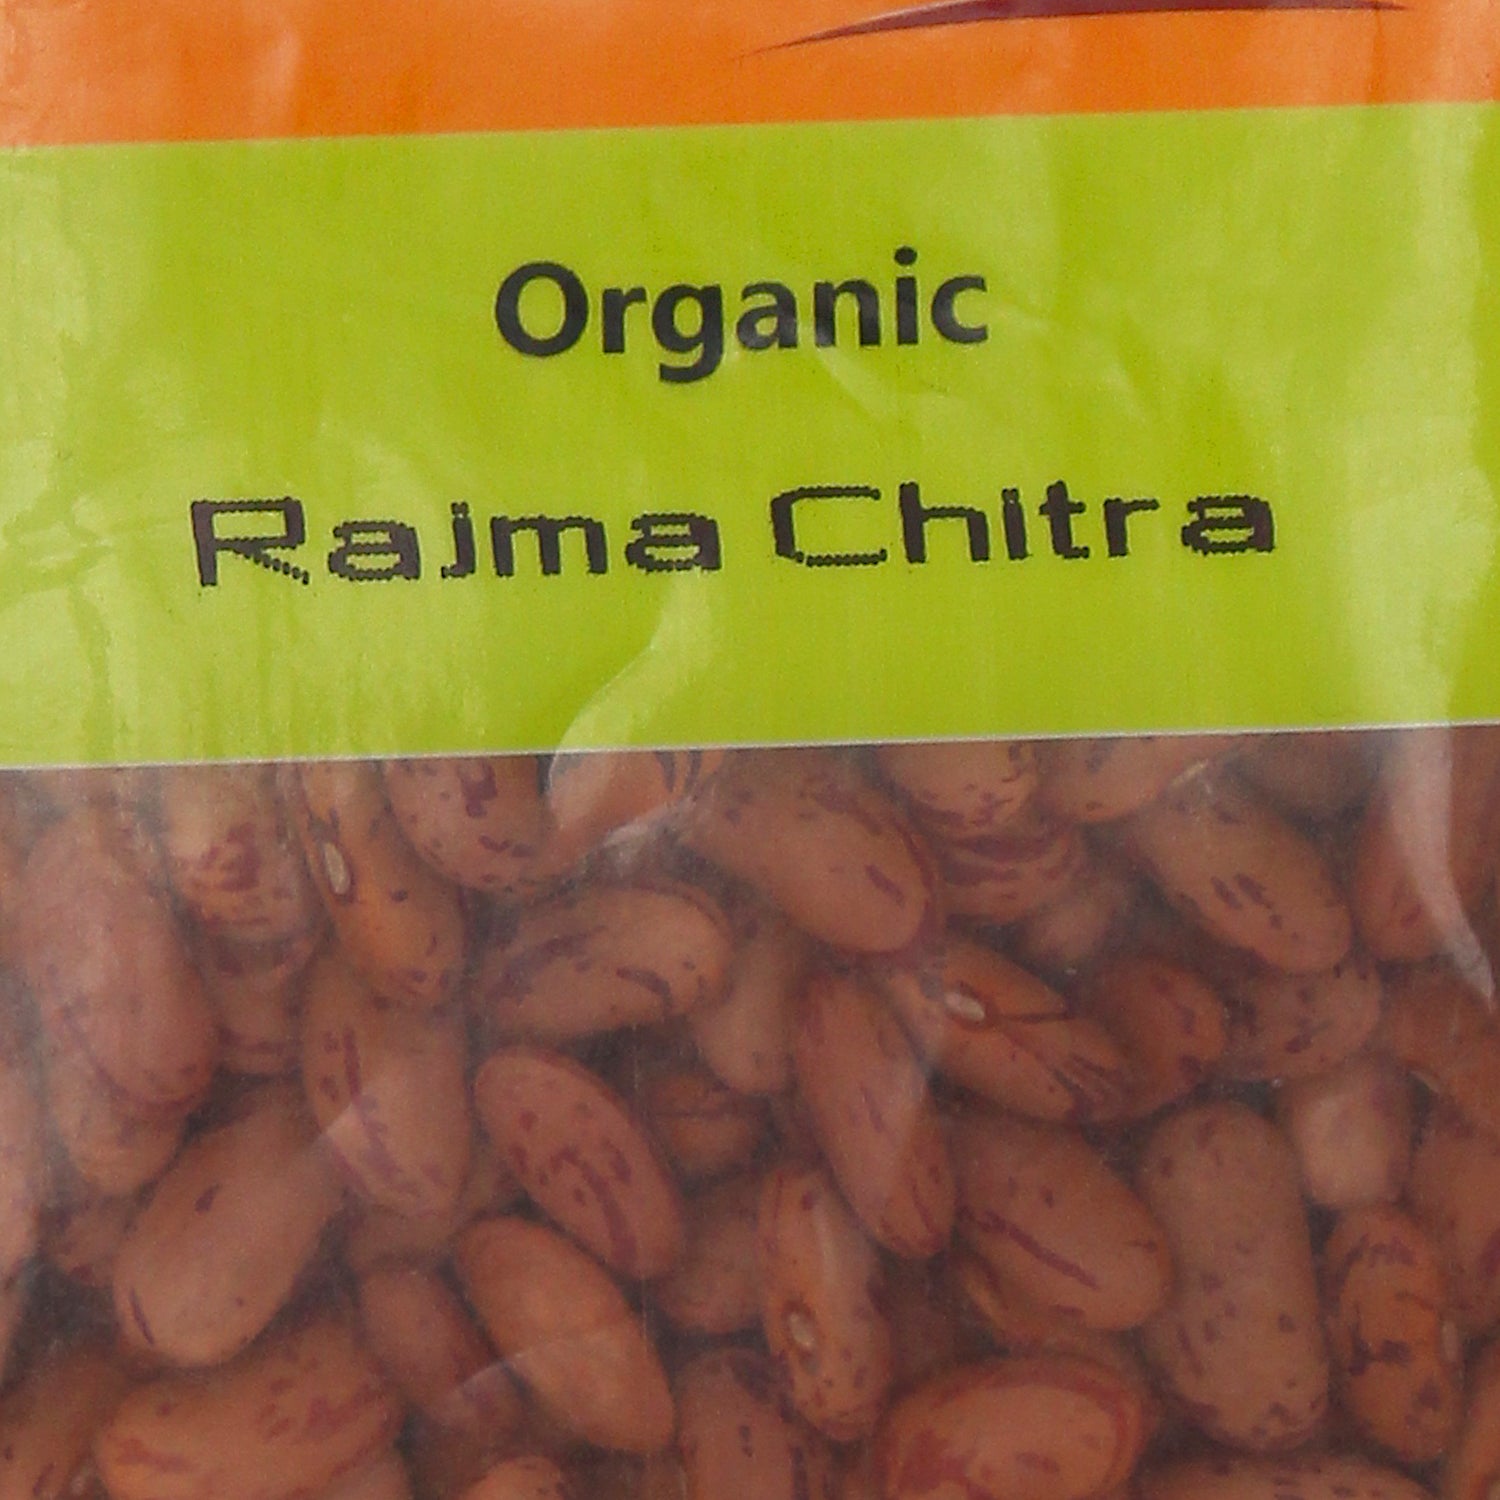 Sampurn Organic Rajma Chitra,Organic rajma chitra, a legume native to the kashmir region and used in traditional indian cuisine, offers a subtle, distinctive flavor, and can be used to prepare the delicious classic indian comfort food dish, rajma.